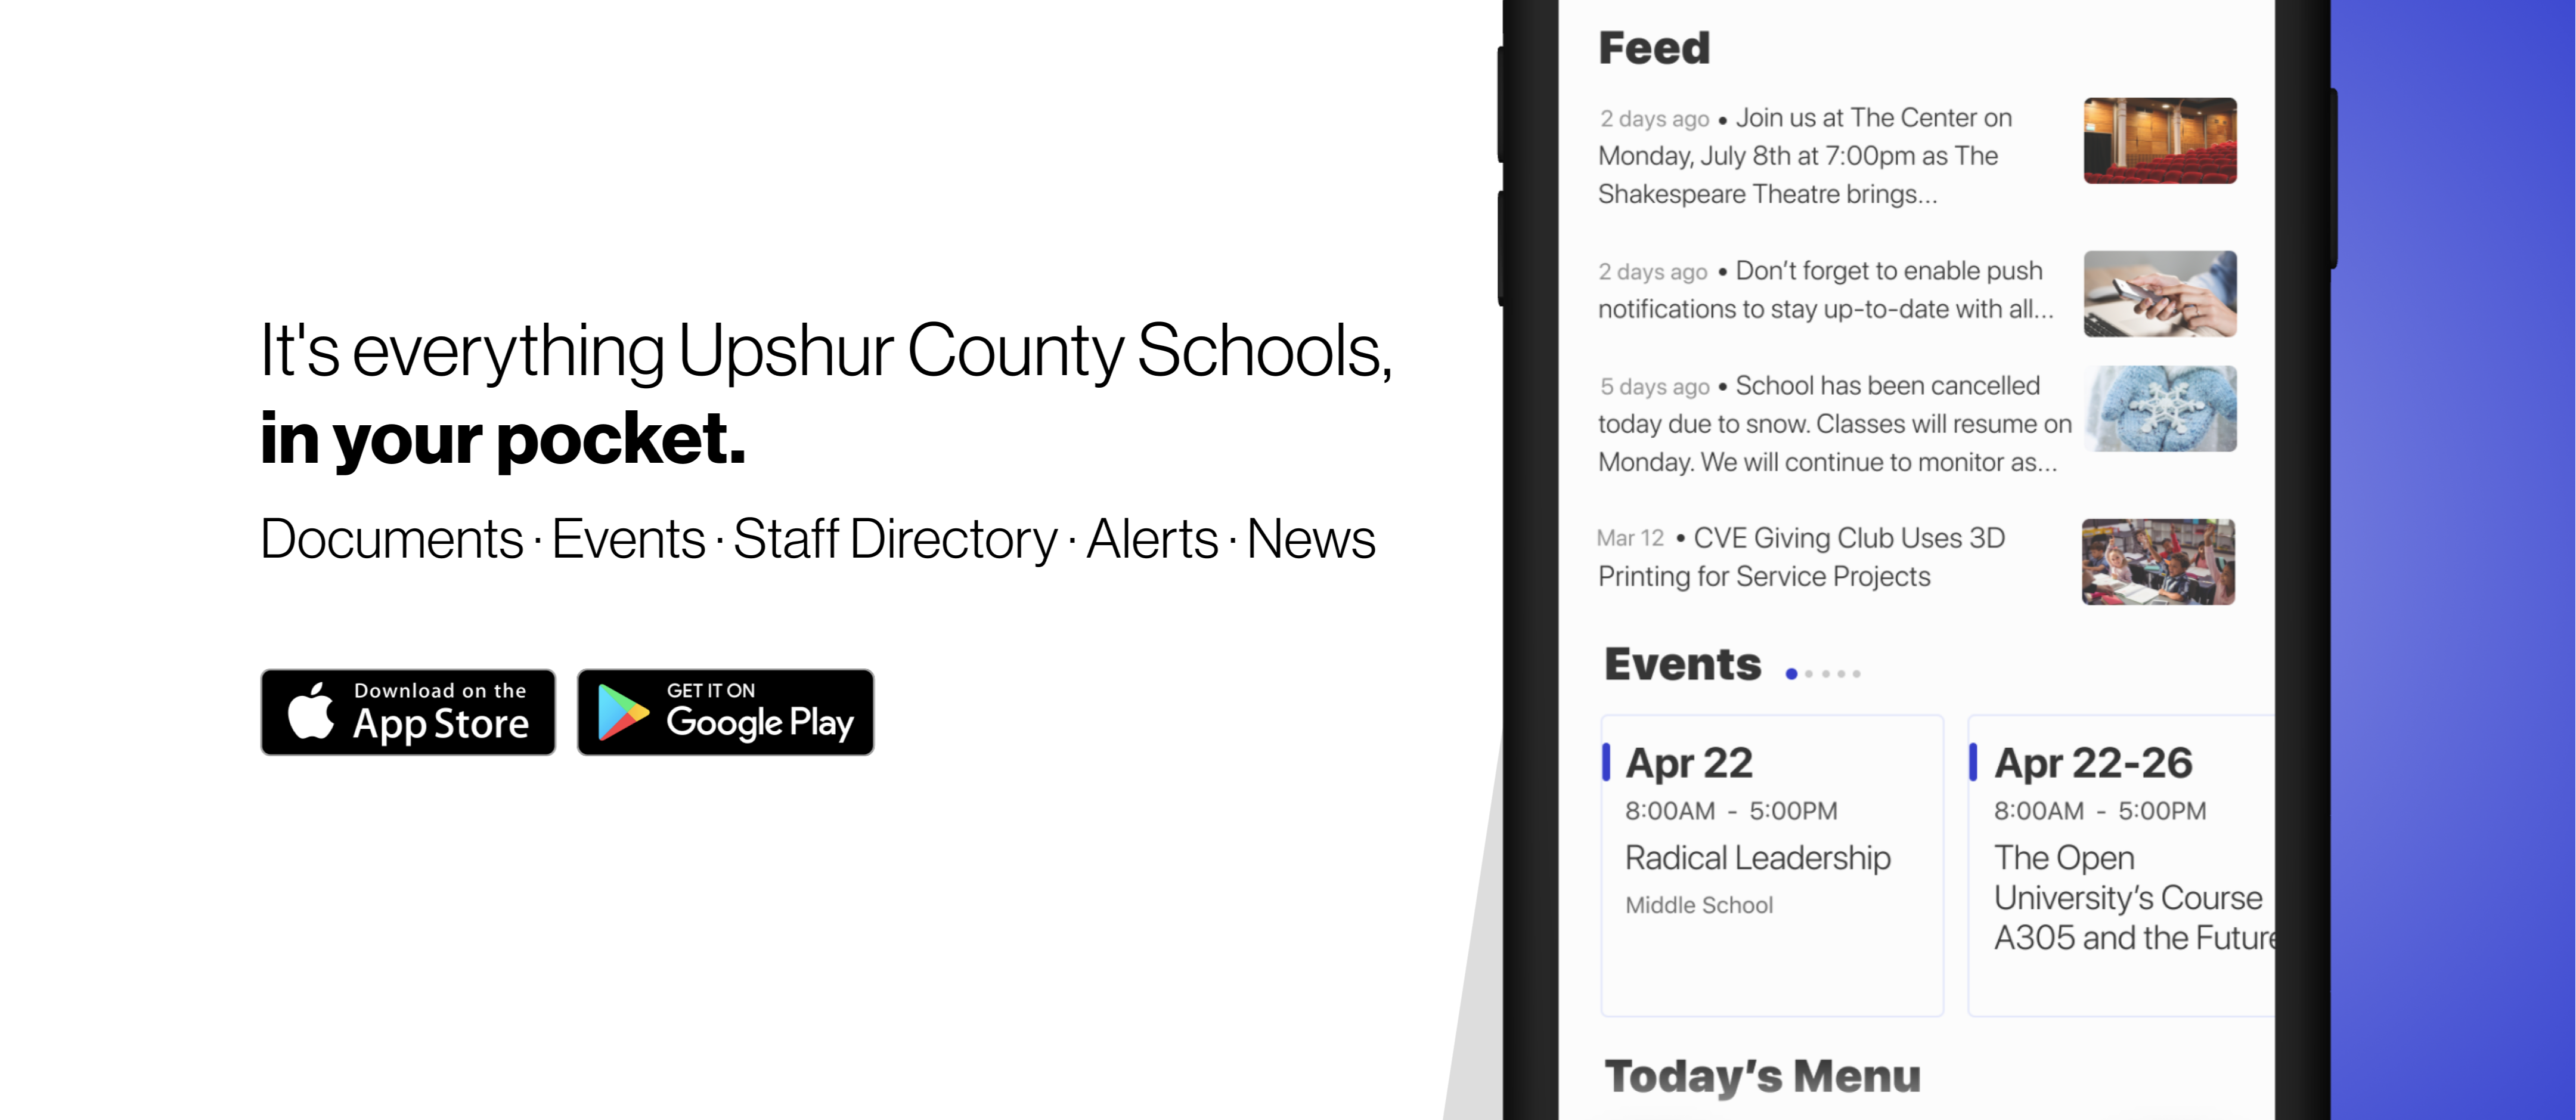 It's everything Upshur County Schools in your pocket. Documents, Events, Alerts, Staff Directory, News. Download in Google Play or App Store.